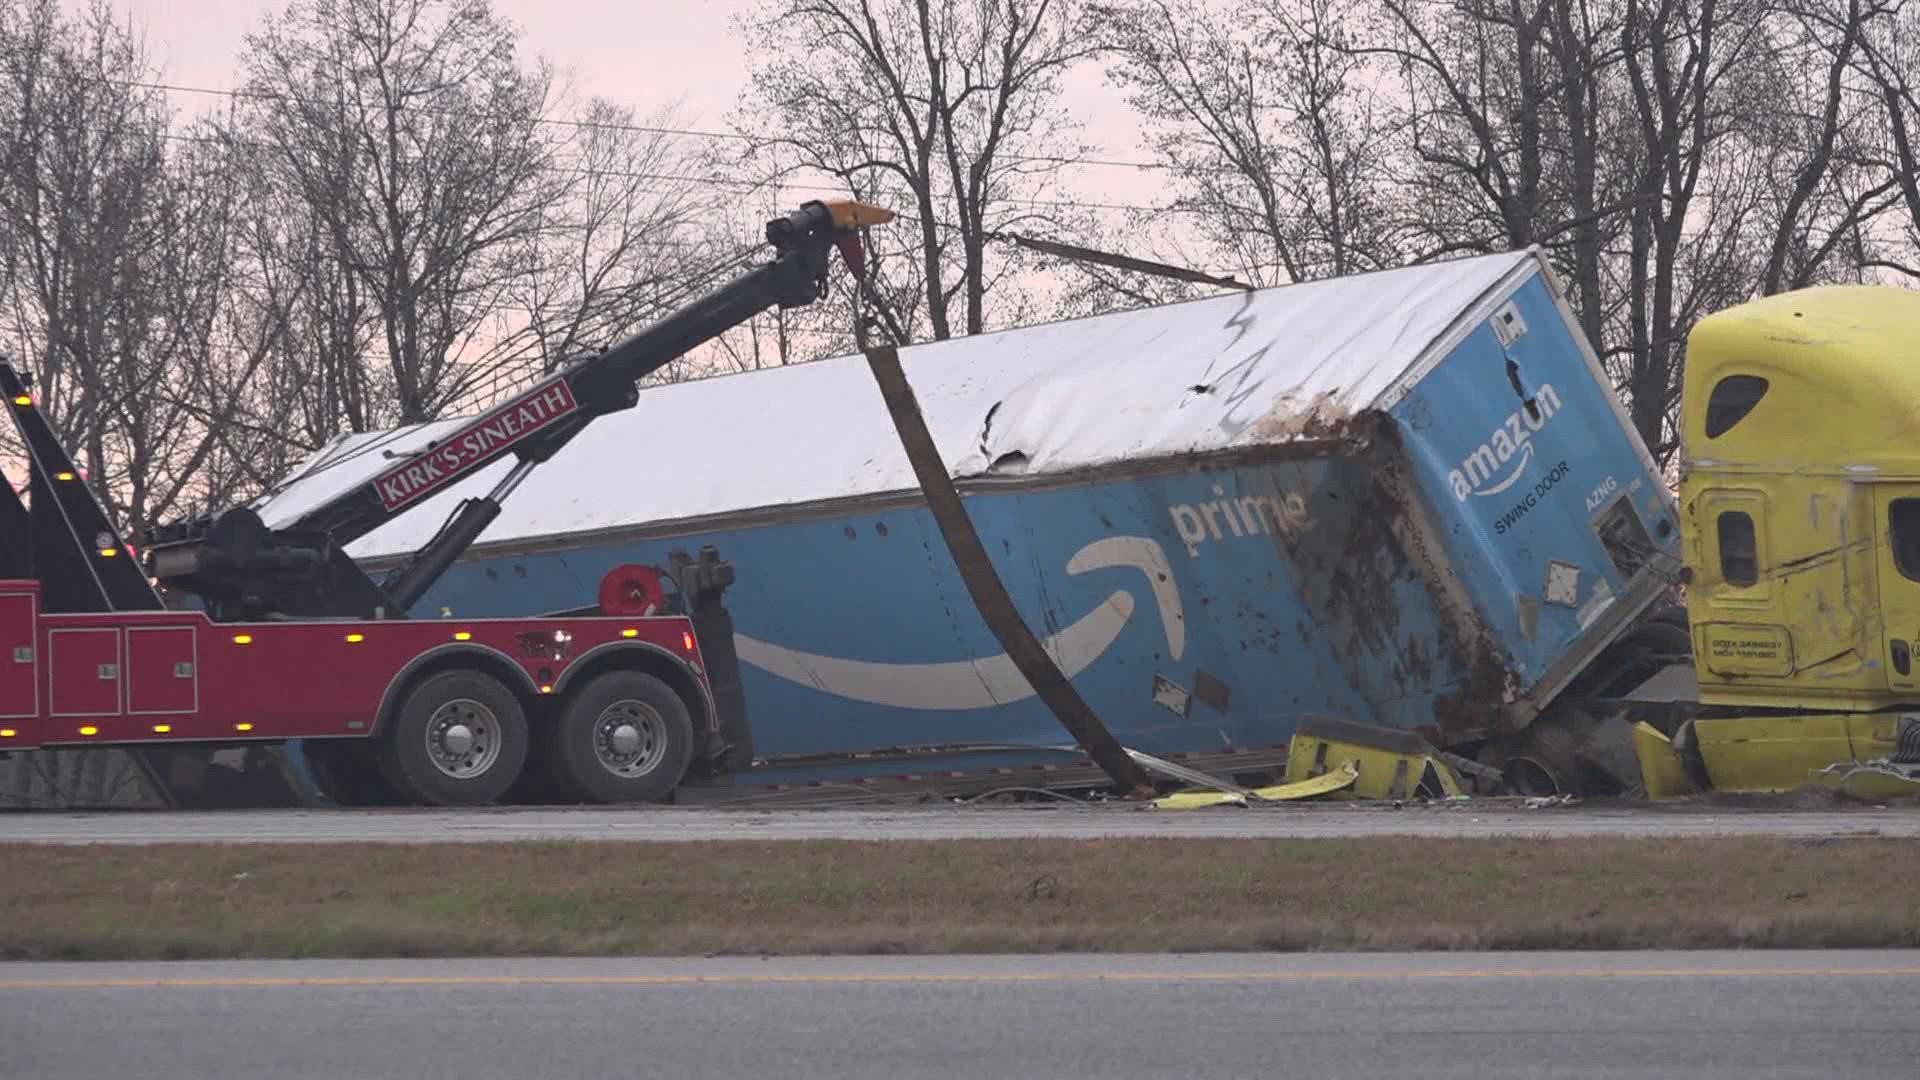 An Amazon truck overturned on I-85 in Greensboro Tuesday morning. Officials reported minor injuries. Lanes are back open.